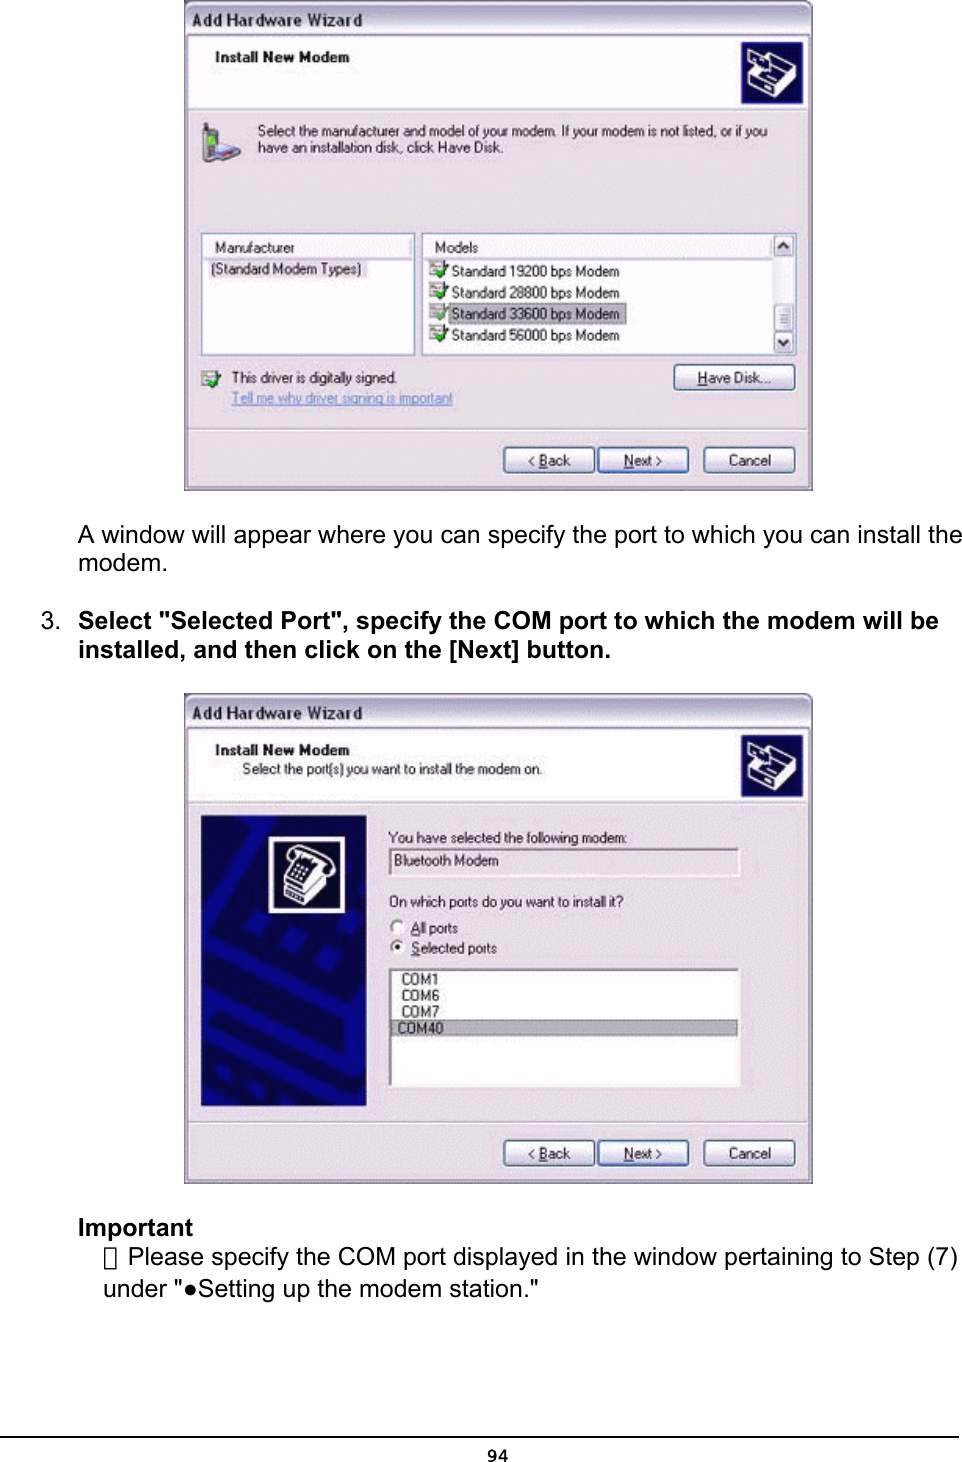   A window will appear where you can specify the port to which you can install the modem. 3.  Select &quot;Selected Port&quot;, specify the COM port to which the modem will be installed, and then click on the [Next] button.  Important  ．Please specify the COM port displayed in the window pertaining to Step (7)  under &quot;●Setting up the modem station.&quot;    94